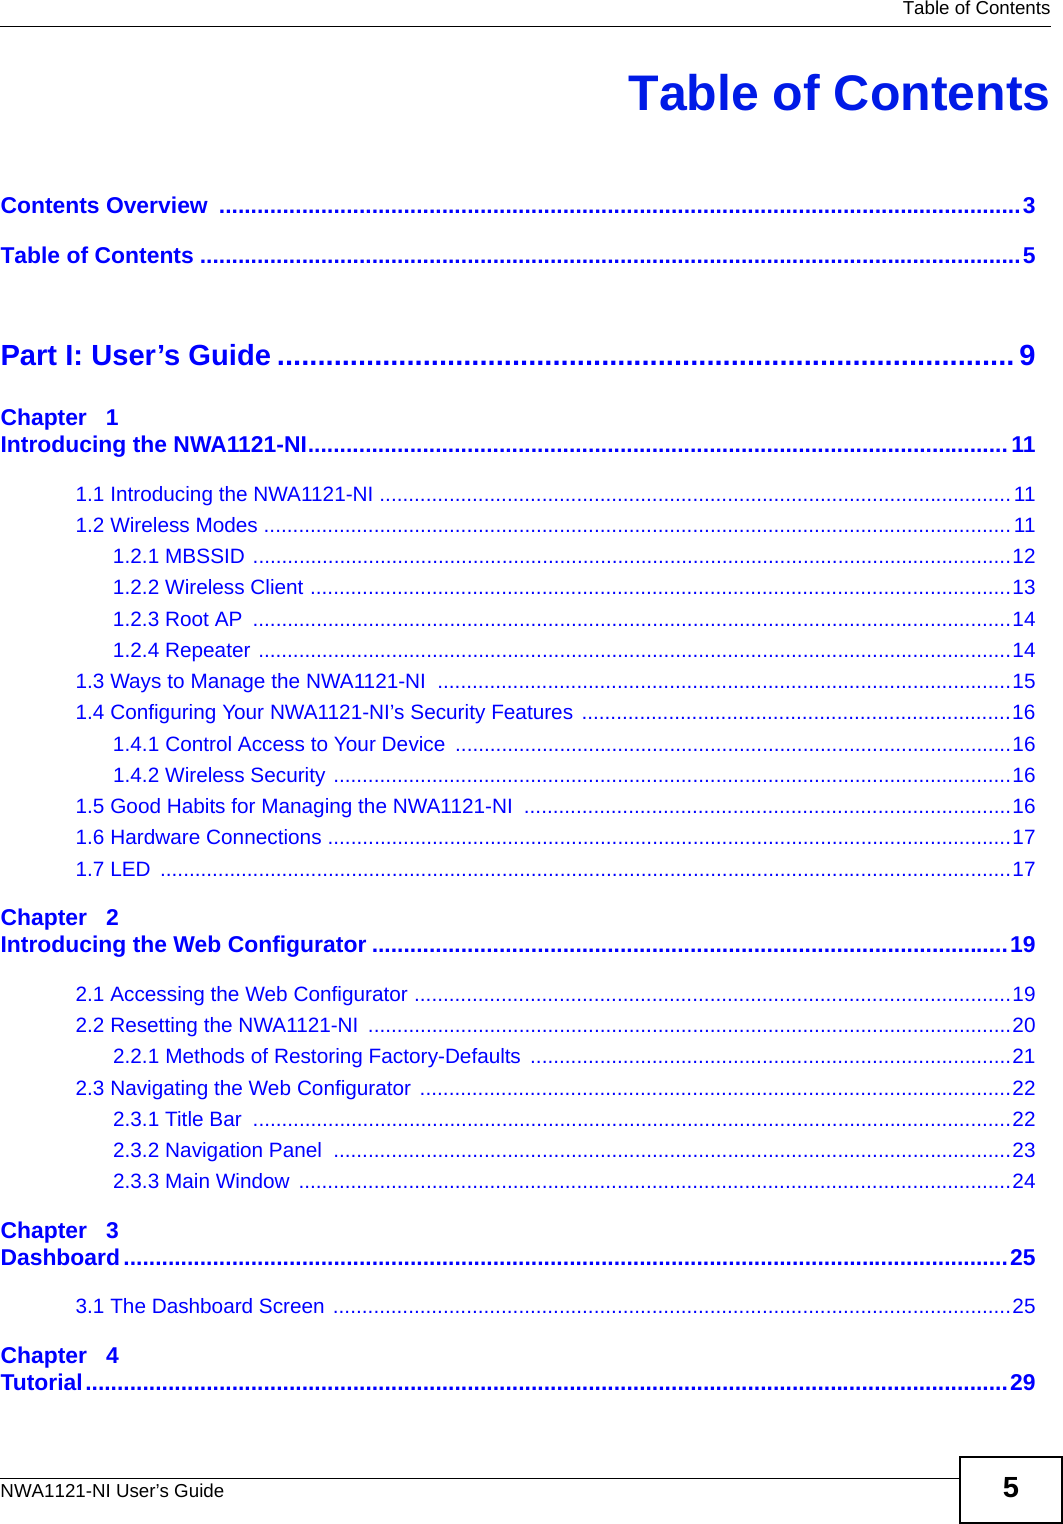   Table of ContentsNWA1121-NI User’s Guide 5Table of ContentsContents Overview  ..............................................................................................................................3Table of Contents .................................................................................................................................5Part I: User’s Guide ...........................................................................................9Chapter   1Introducing the NWA1121-NI..............................................................................................................111.1 Introducing the NWA1121-NI .............................................................................................................111.2 Wireless Modes .................................................................................................................................111.2.1 MBSSID ...................................................................................................................................121.2.2 Wireless Client .........................................................................................................................131.2.3 Root AP  ...................................................................................................................................141.2.4 Repeater ..................................................................................................................................141.3 Ways to Manage the NWA1121-NI  ...................................................................................................151.4 Configuring Your NWA1121-NI’s Security Features ..........................................................................161.4.1 Control Access to Your Device ................................................................................................161.4.2 Wireless Security .....................................................................................................................161.5 Good Habits for Managing the NWA1121-NI  ....................................................................................161.6 Hardware Connections ......................................................................................................................171.7 LED  ...................................................................................................................................................17Chapter   2Introducing the Web Configurator ....................................................................................................192.1 Accessing the Web Configurator .......................................................................................................192.2 Resetting the NWA1121-NI  ...............................................................................................................202.2.1 Methods of Restoring Factory-Defaults ...................................................................................212.3 Navigating the Web Configurator ......................................................................................................222.3.1 Title Bar  ...................................................................................................................................222.3.2 Navigation Panel  .....................................................................................................................232.3.3 Main Window  ...........................................................................................................................24Chapter   3Dashboard...........................................................................................................................................253.1 The Dashboard Screen .....................................................................................................................25Chapter   4Tutorial.................................................................................................................................................29